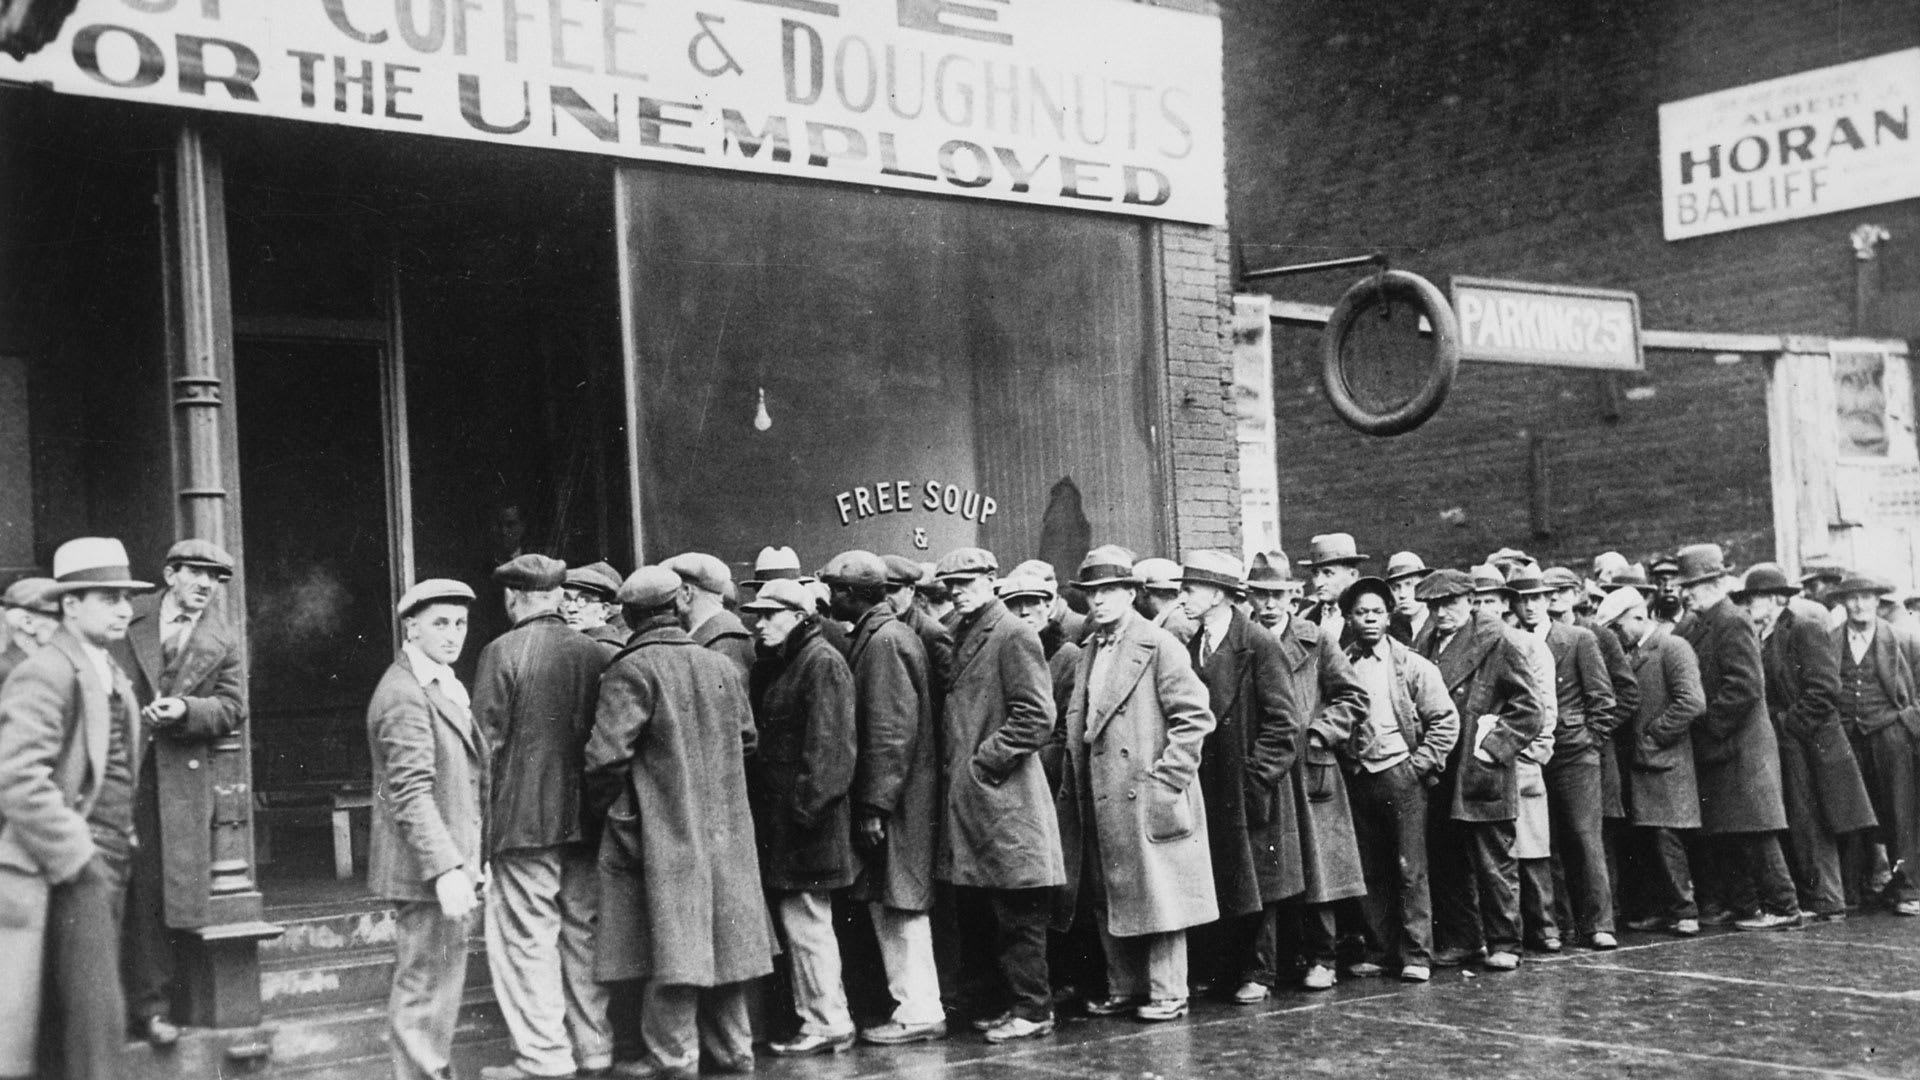 Top economist: The 1930s Depression was ‘Great.’ This one might be greater